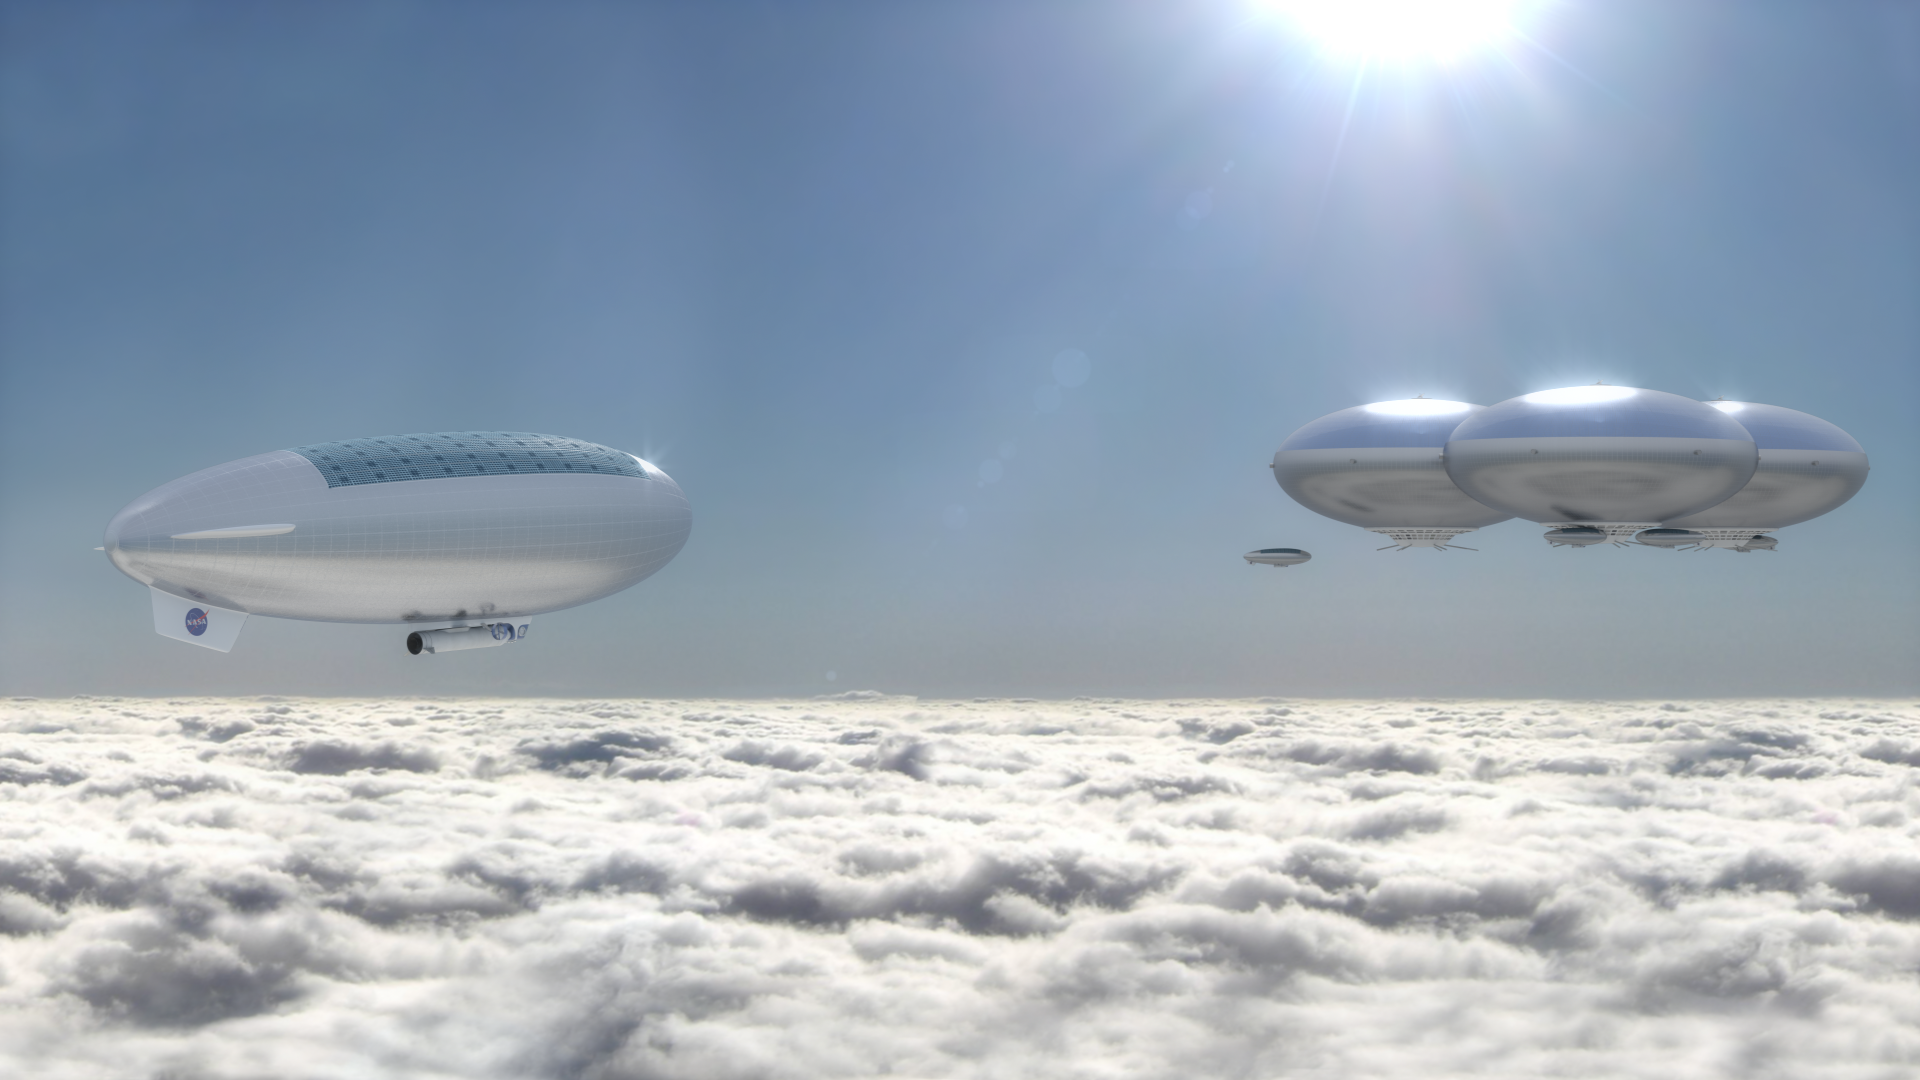 H.A.V.O.C. To Conquer Venusian Skies For Human Settlements